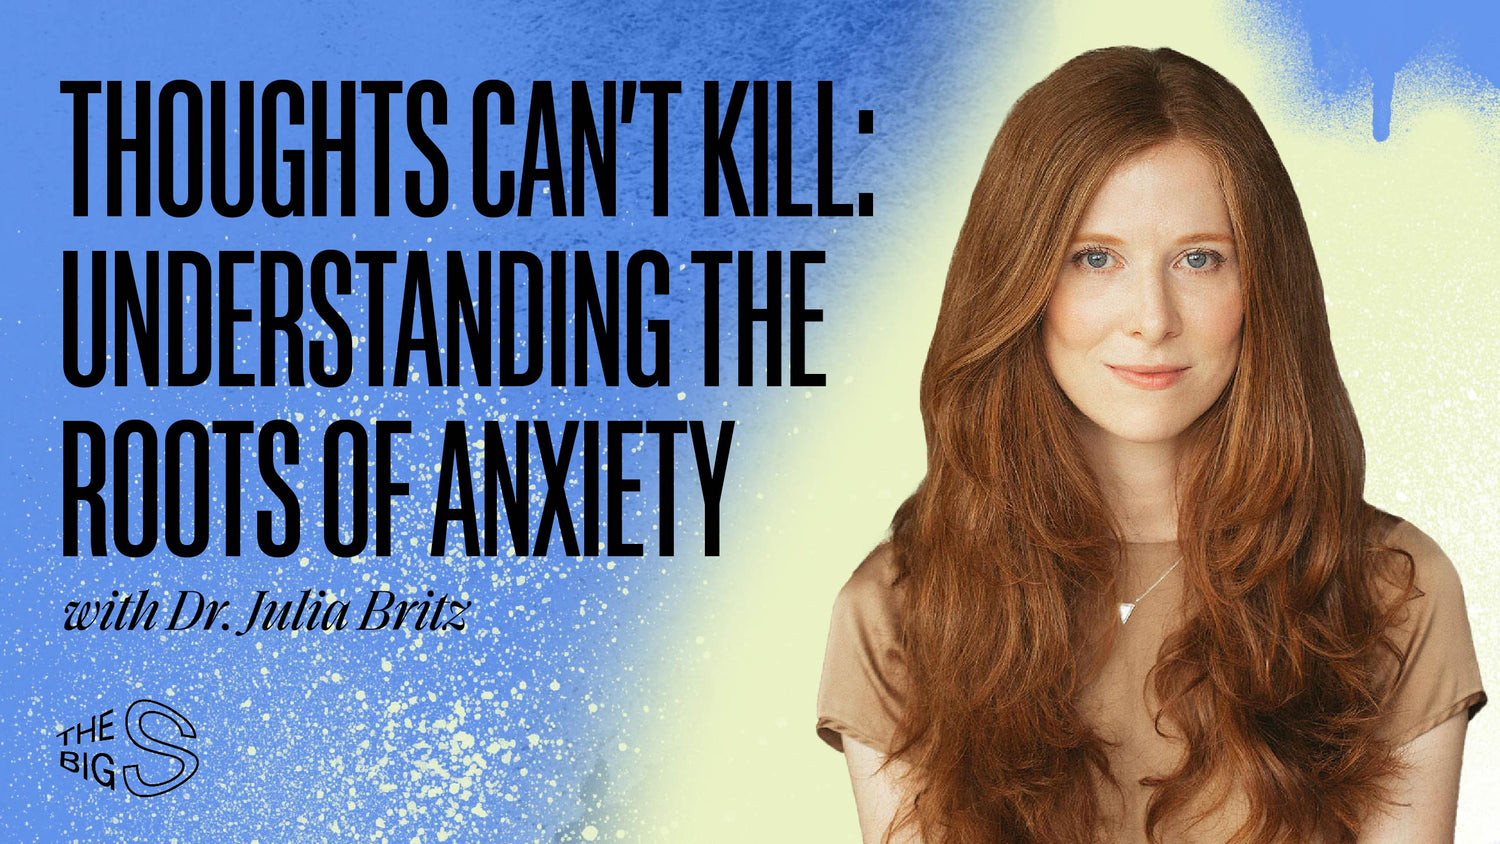 31. Thoughts Can’t Kill: Understanding the Roots of Anxiety with Dr. Julia Britz